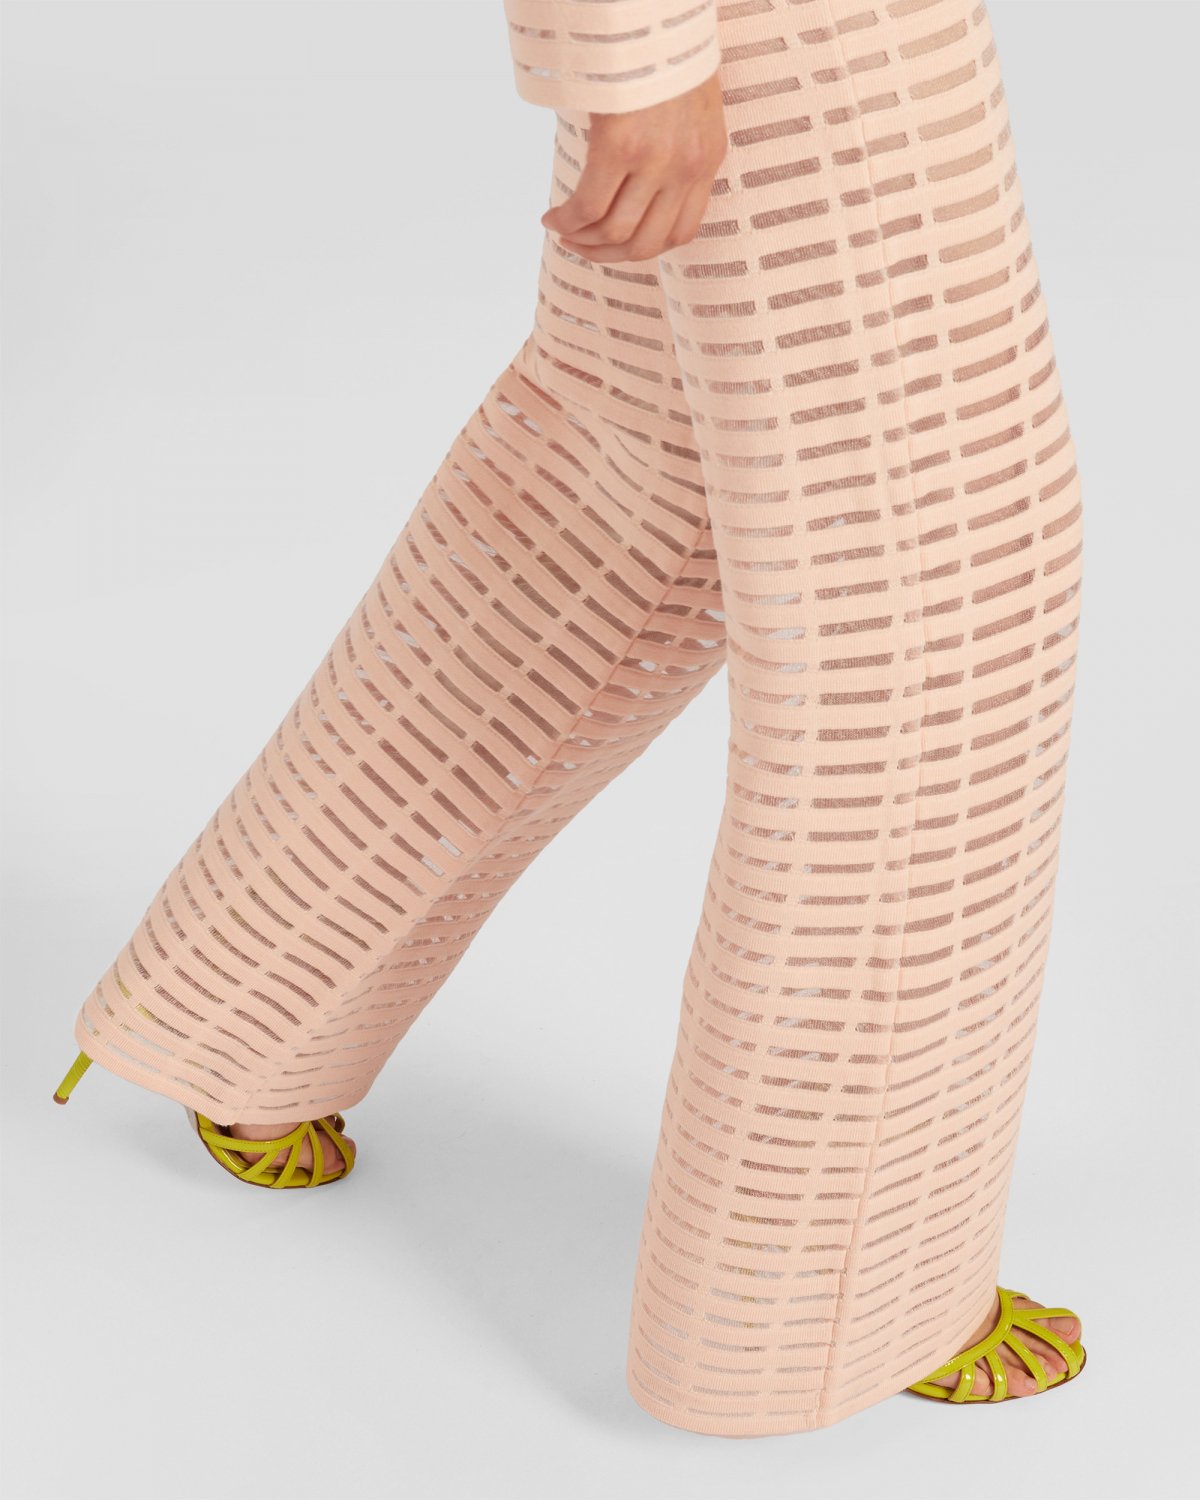 Iconic knit pants | Fall Winter 2023-24, PRE-FALL Collection 2023, Knitwear, Skirts & Trousers, Trousers | Genny